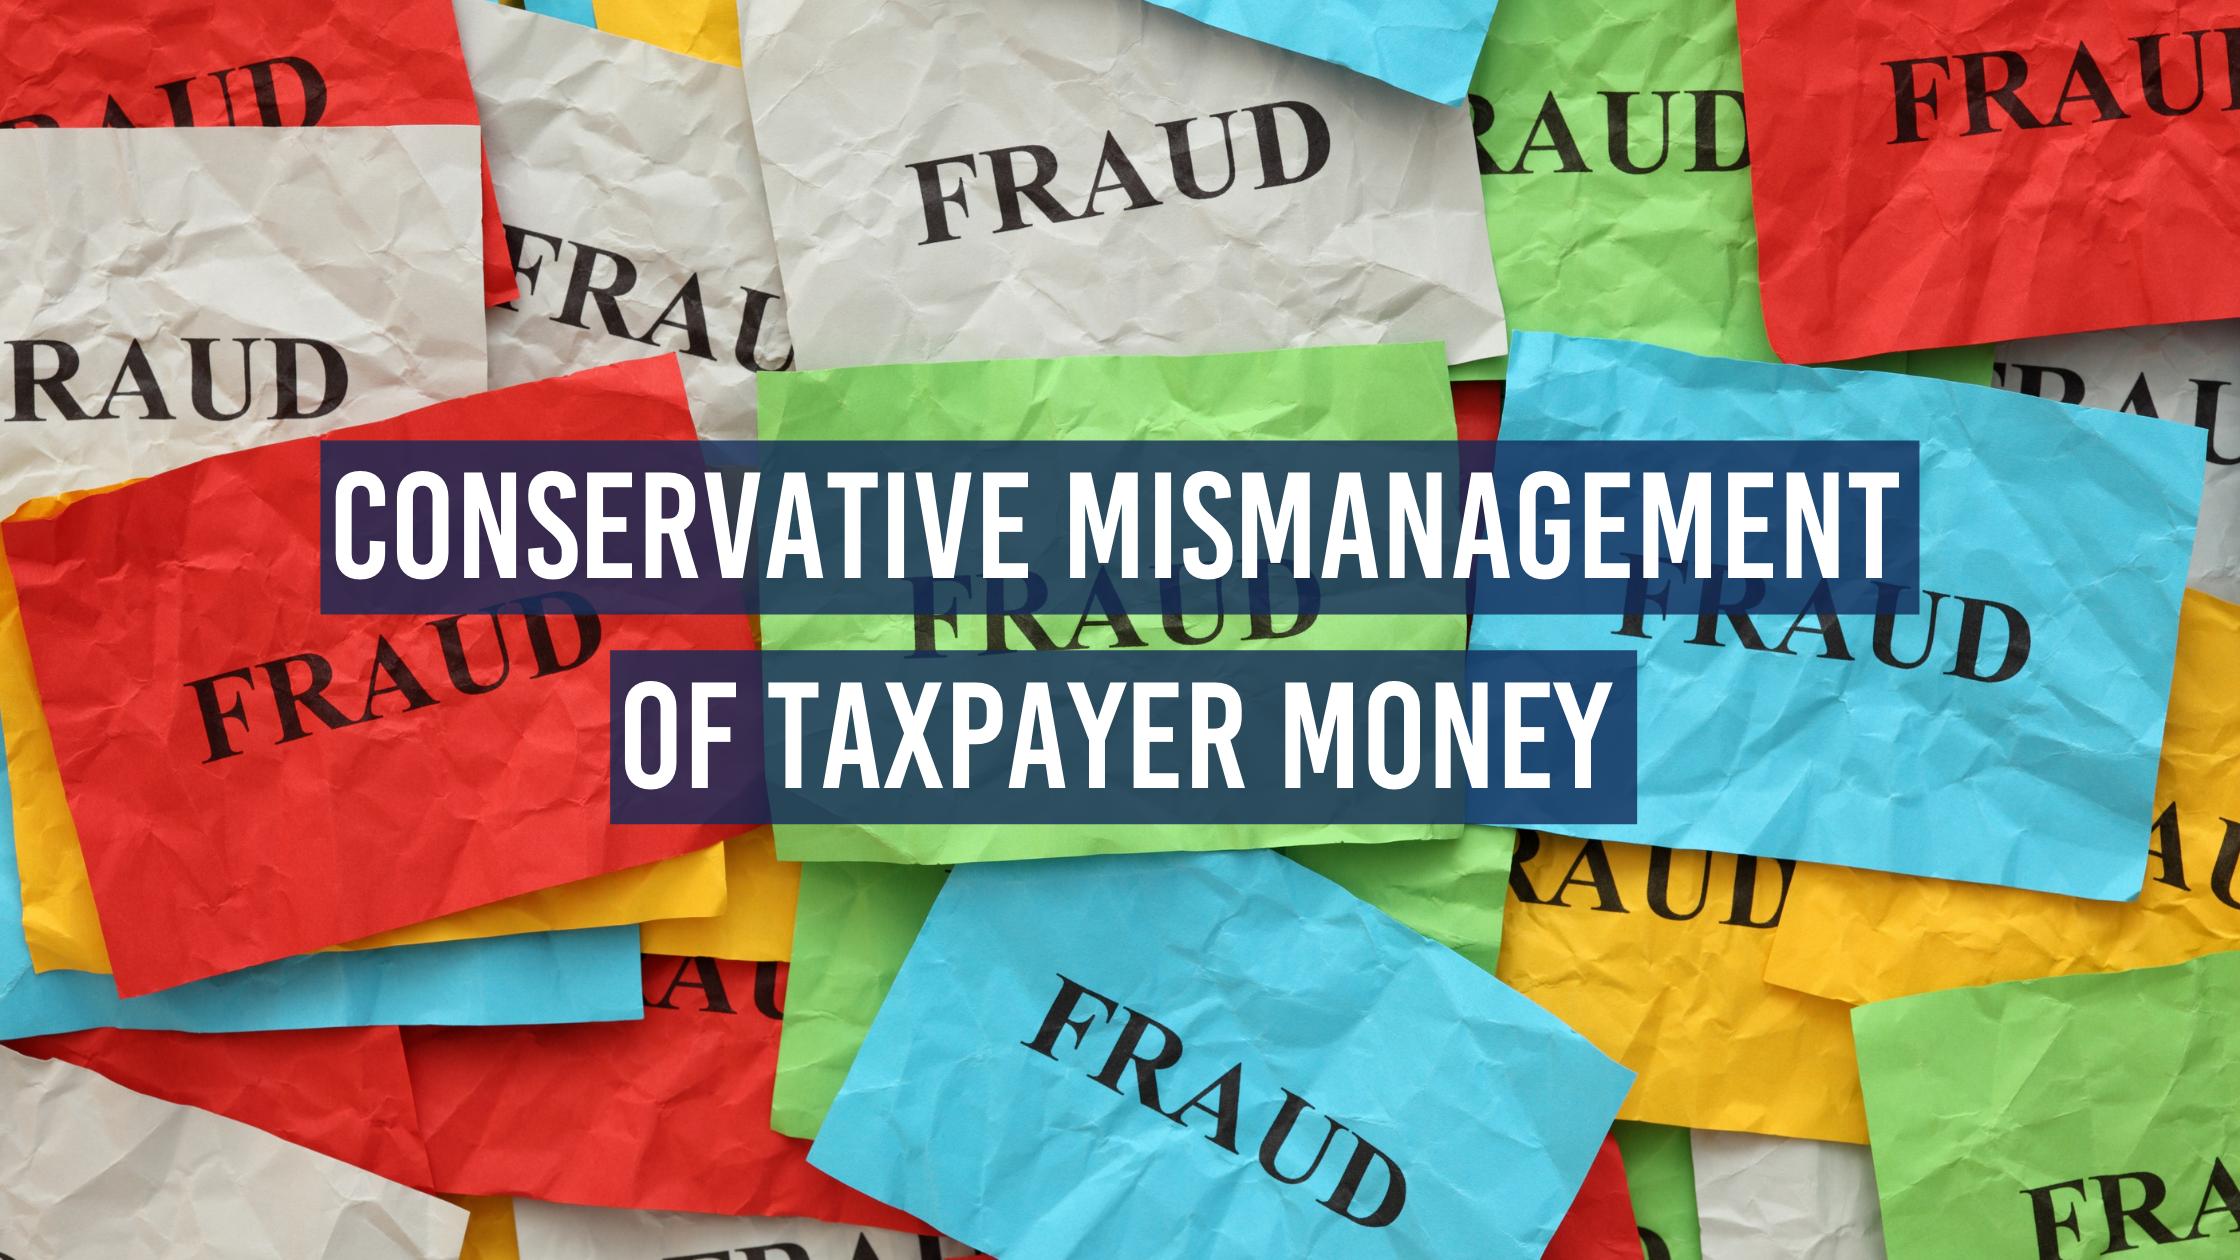 Conservative Mismanagement text on picture of post it notes with Fraud written on them.